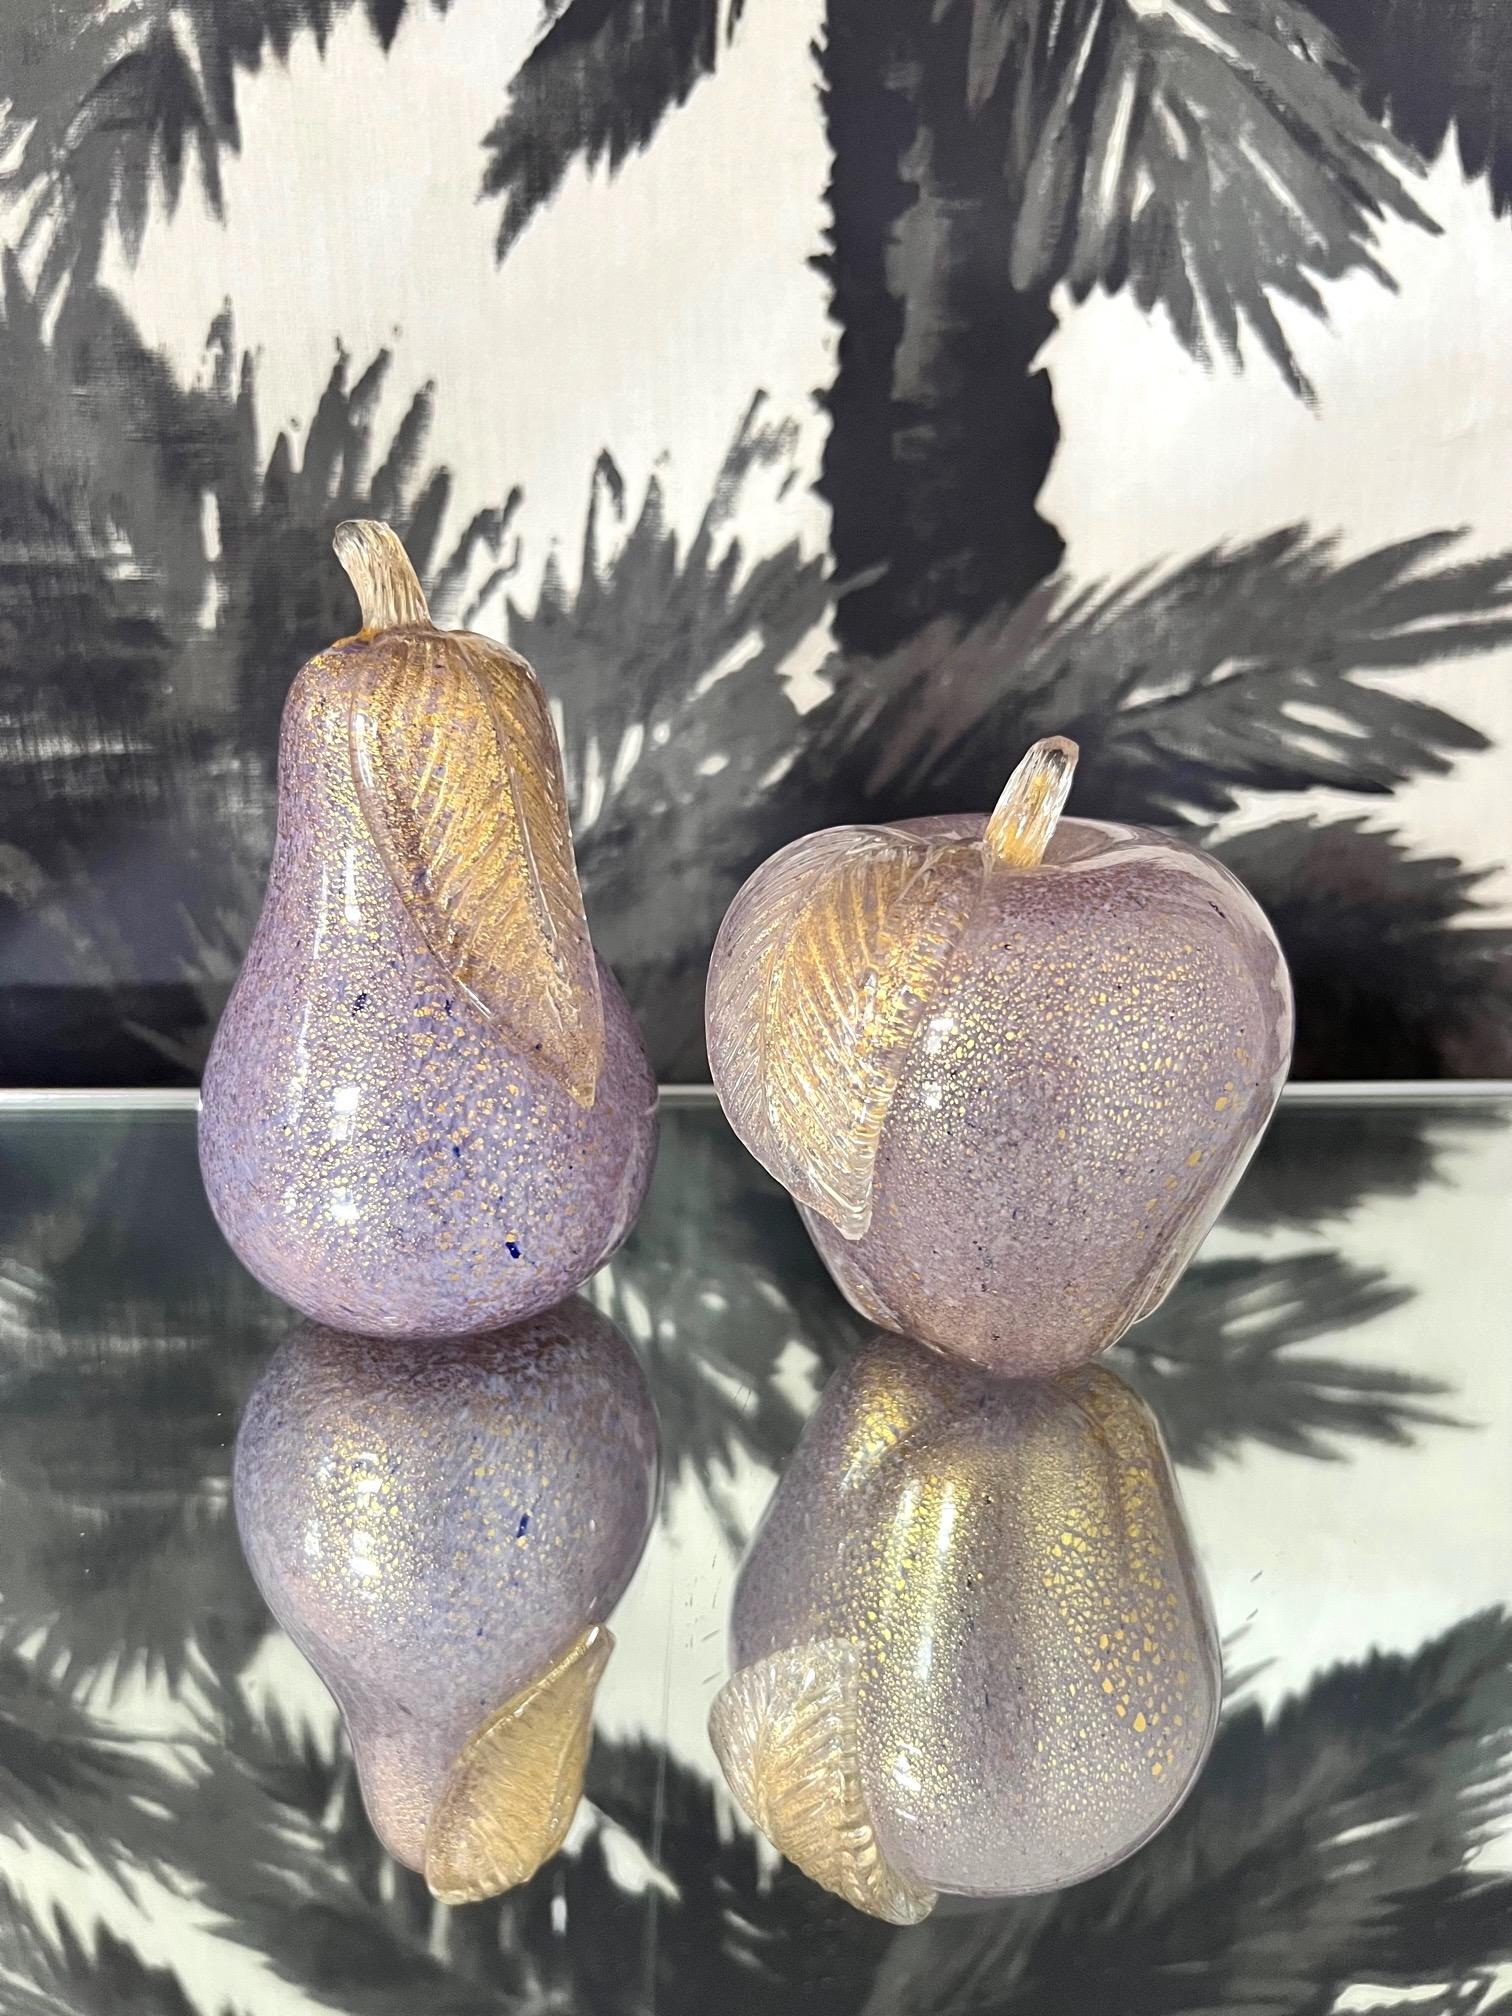 Mid-Century Modern Murano Pear and Apple Sculptures in Lilac Glass with Gold Flecks, C. 1980